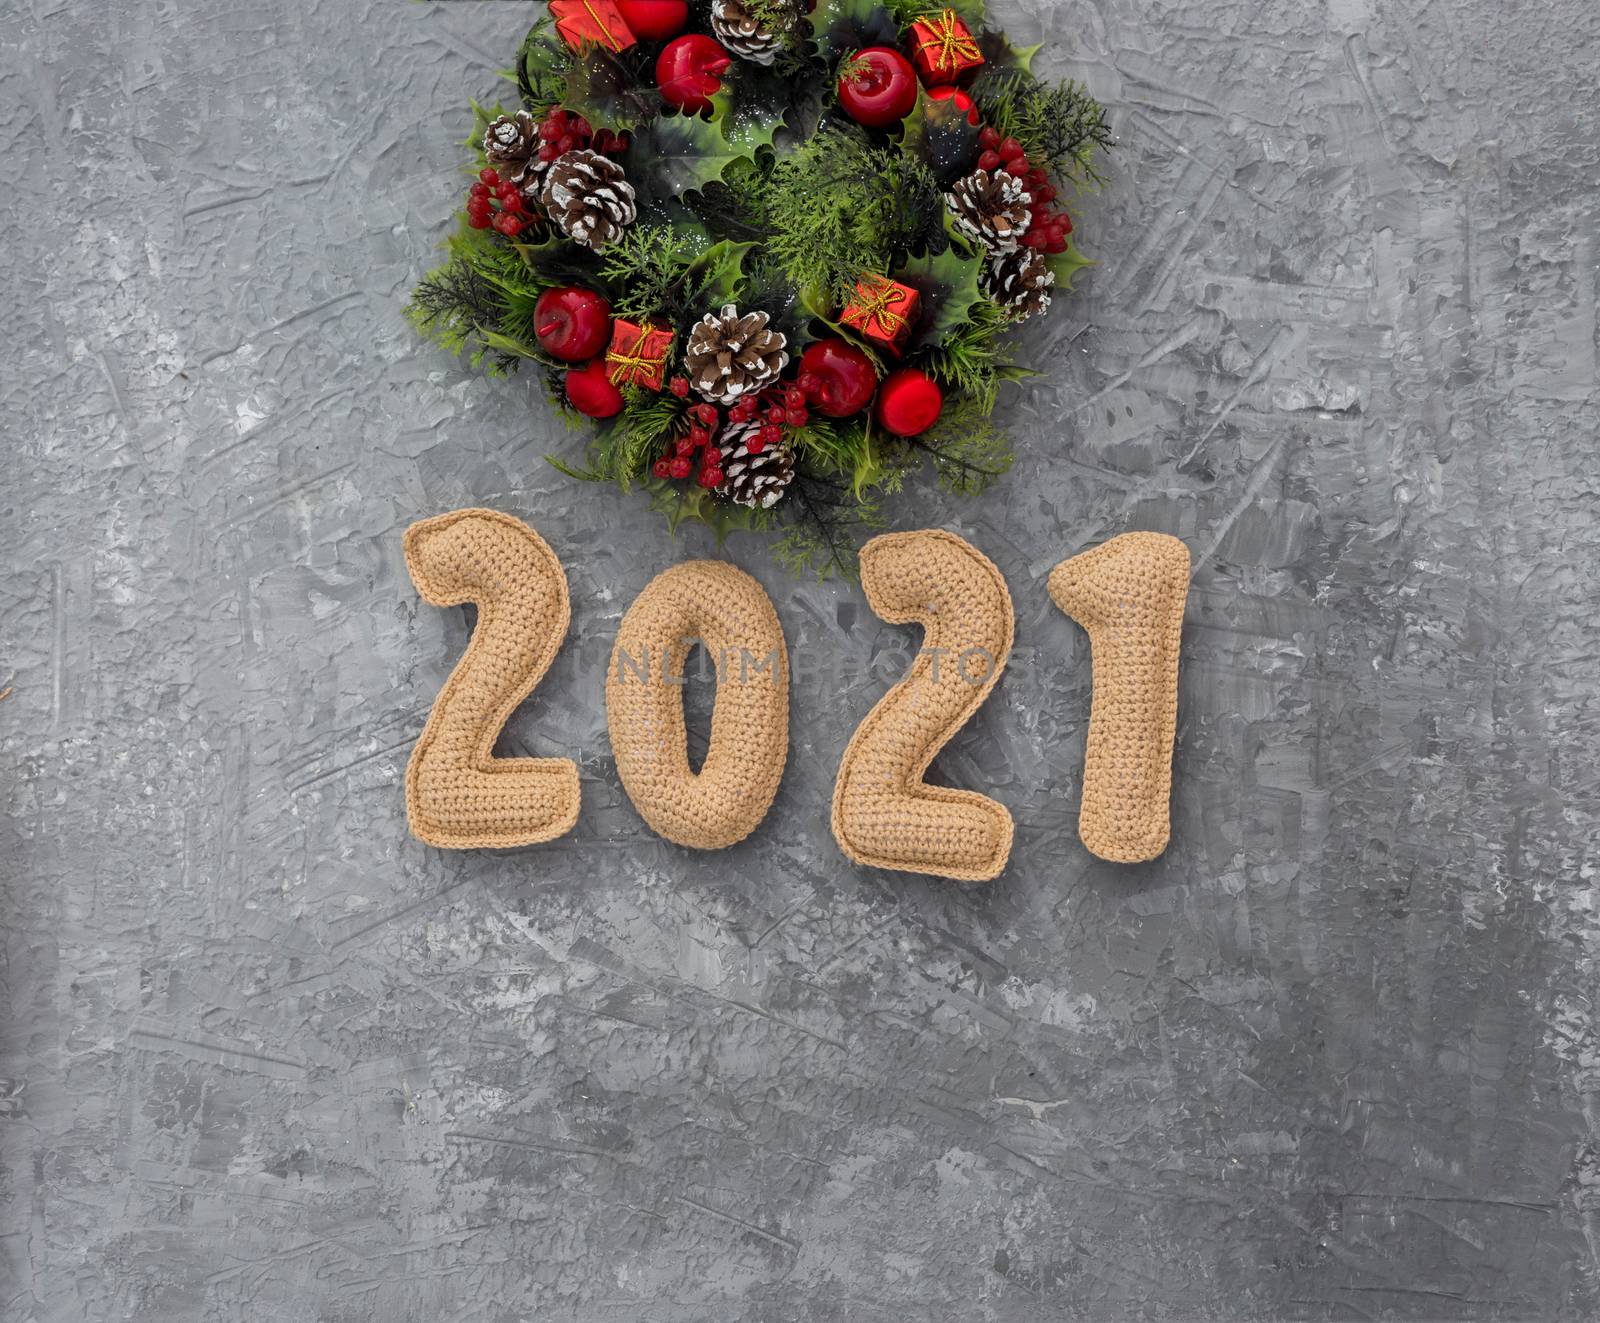 .Christmas background with knitted numbers 2021 and decorative wreath. by galinasharapova